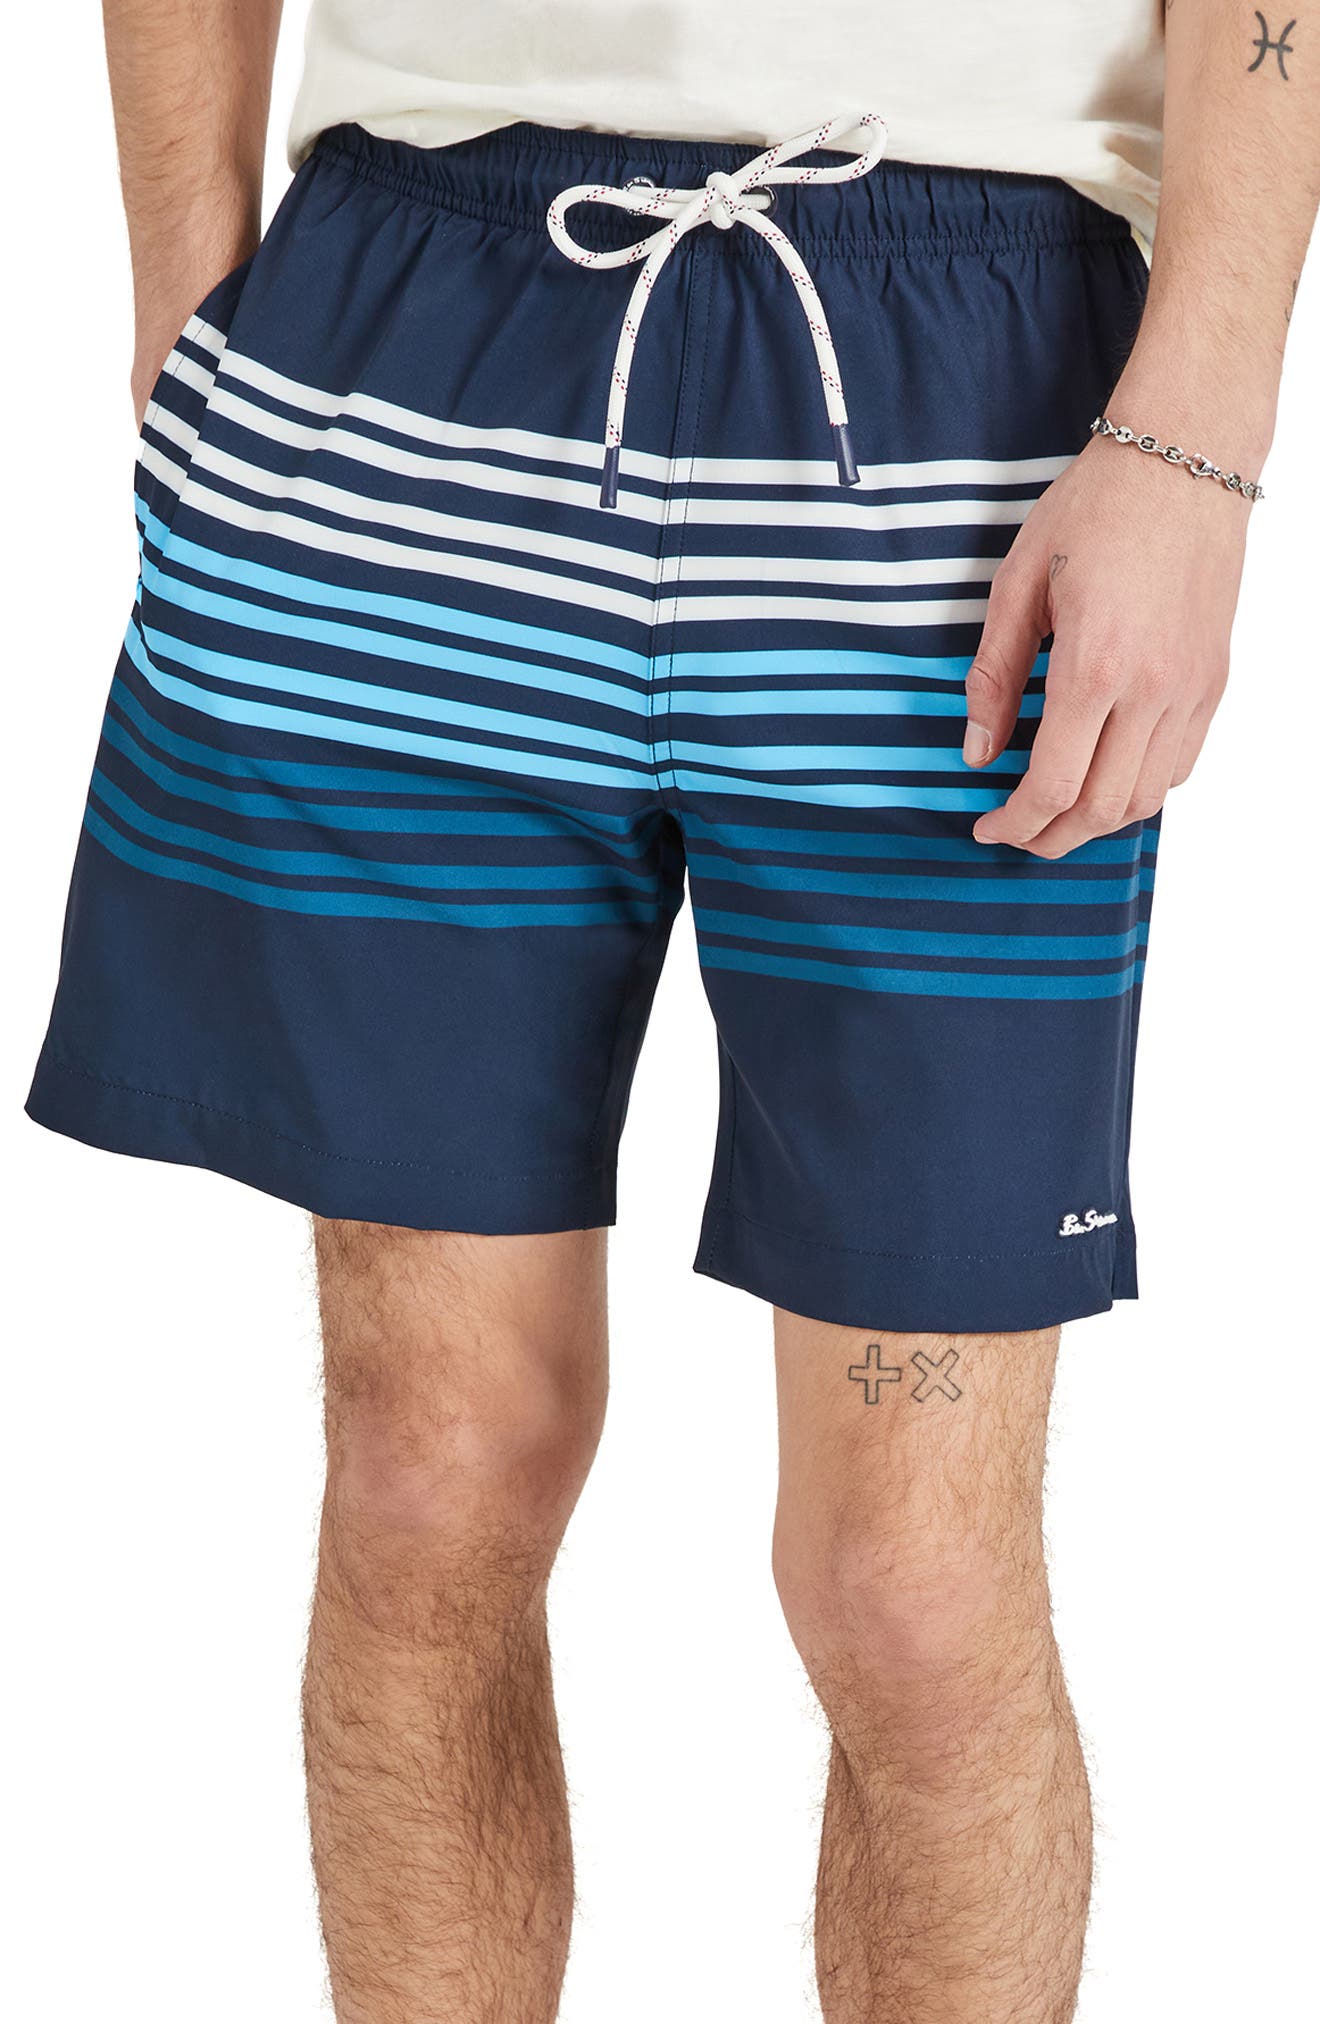 Ben Sherman Boys Swimming Shorts Navy Blue 7Y up to 15 Years 